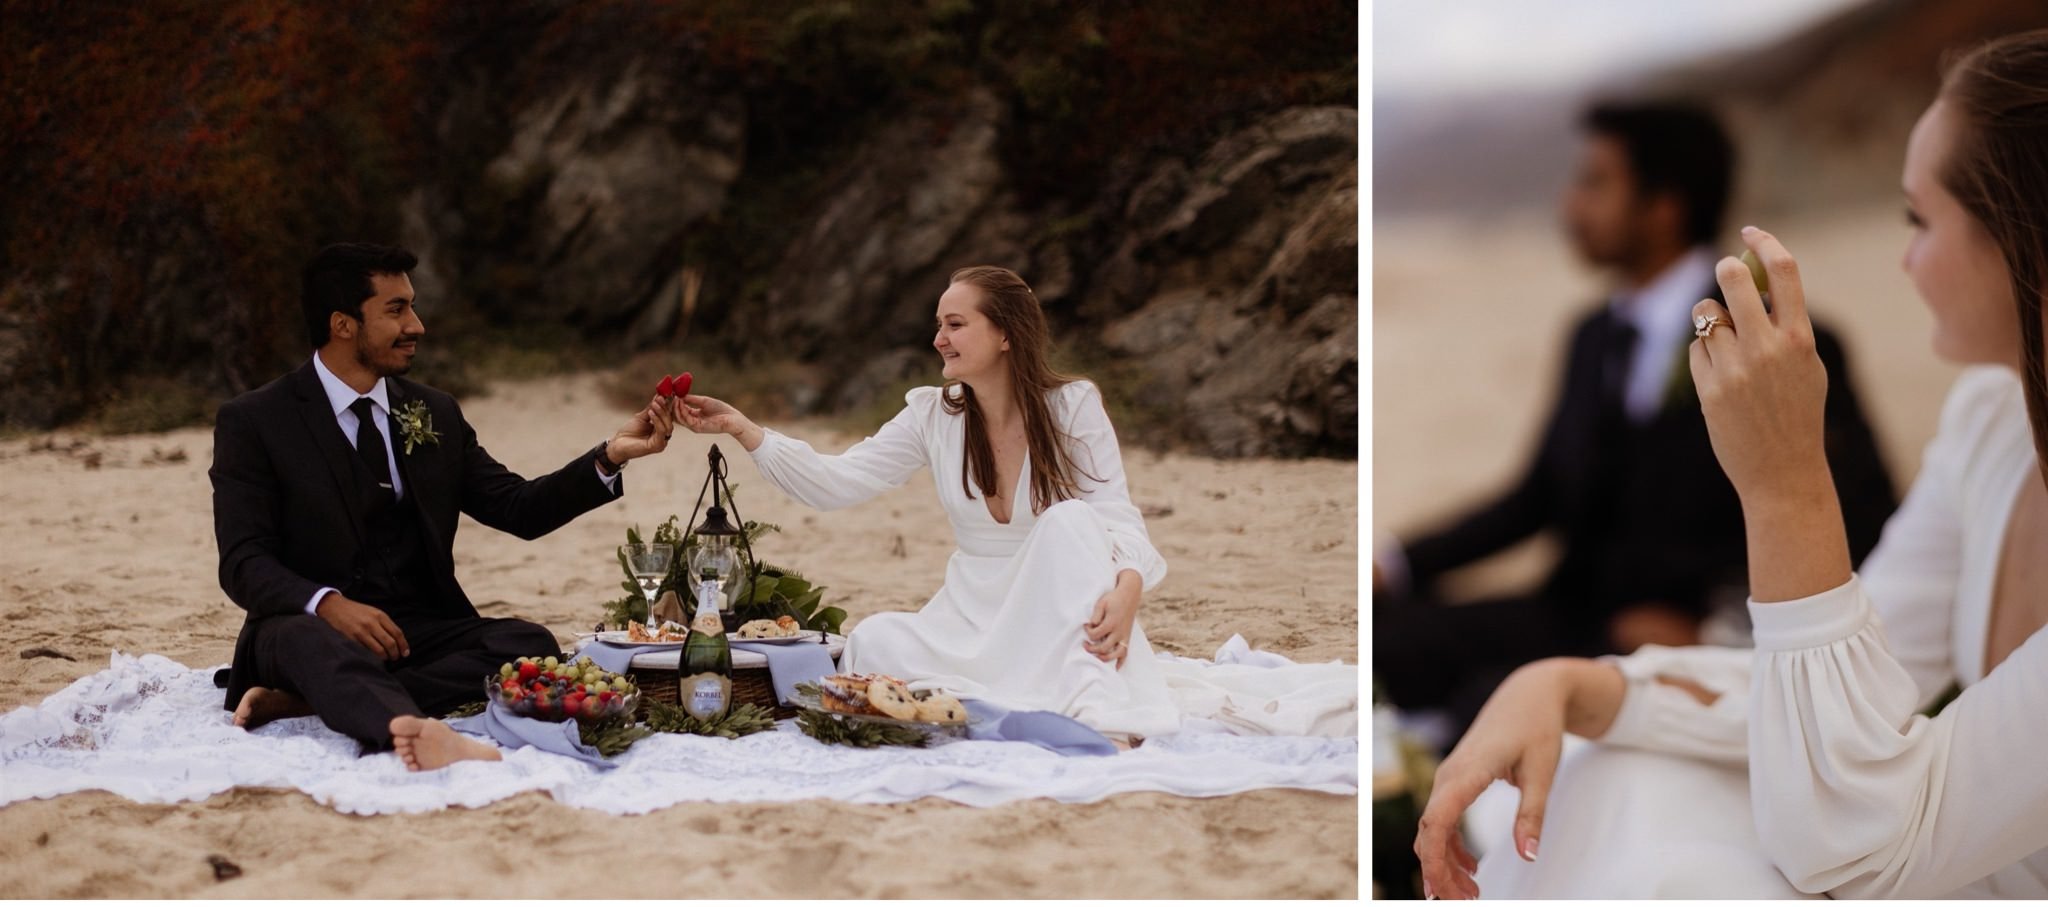 122_Two-Day Big Sur Redwoods Elopement with Family_Will Khoury Elopement Photographer.jpg